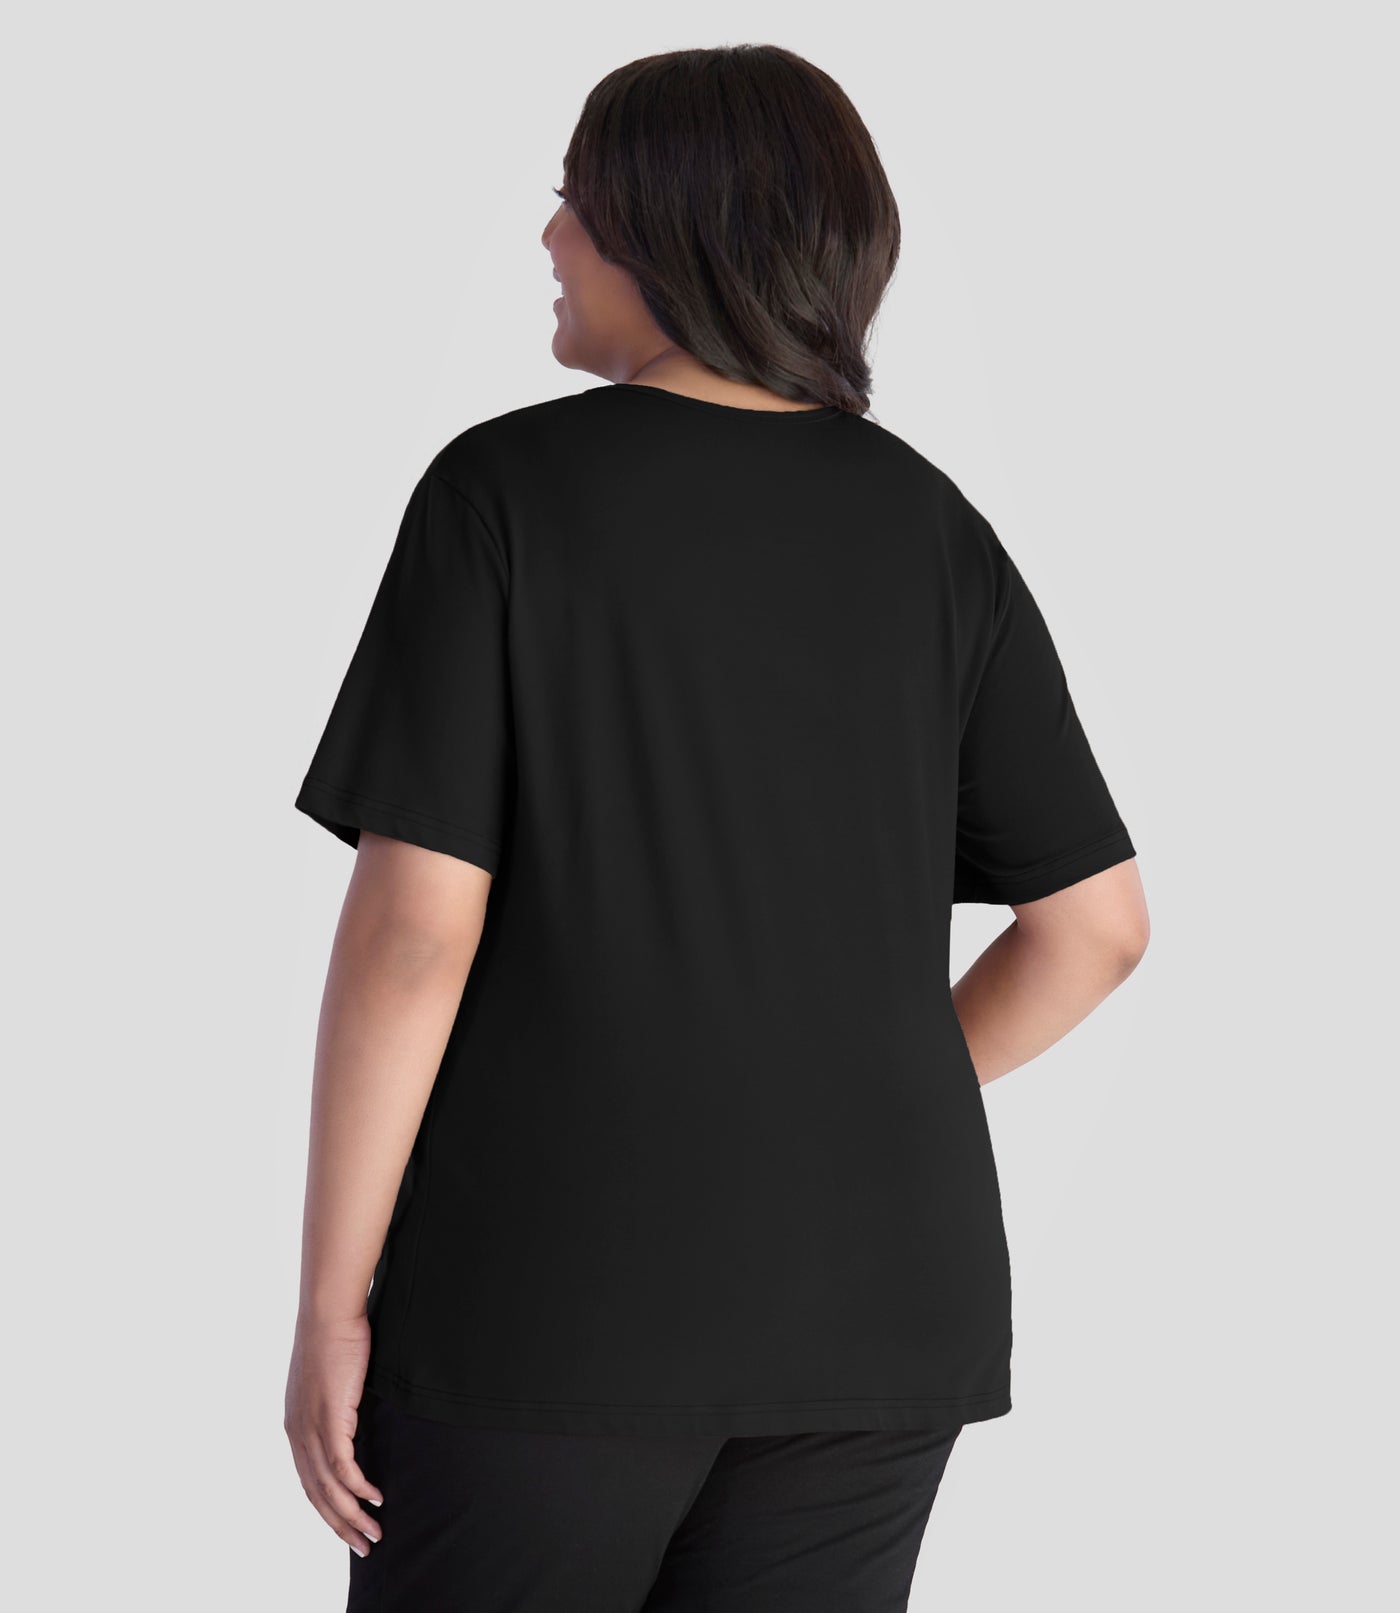 JunoActive model wearing EasyLuxe Classics V-Neck Plus Size Top in color black . Model is facing back with her left arm by her side and right hand on hip.